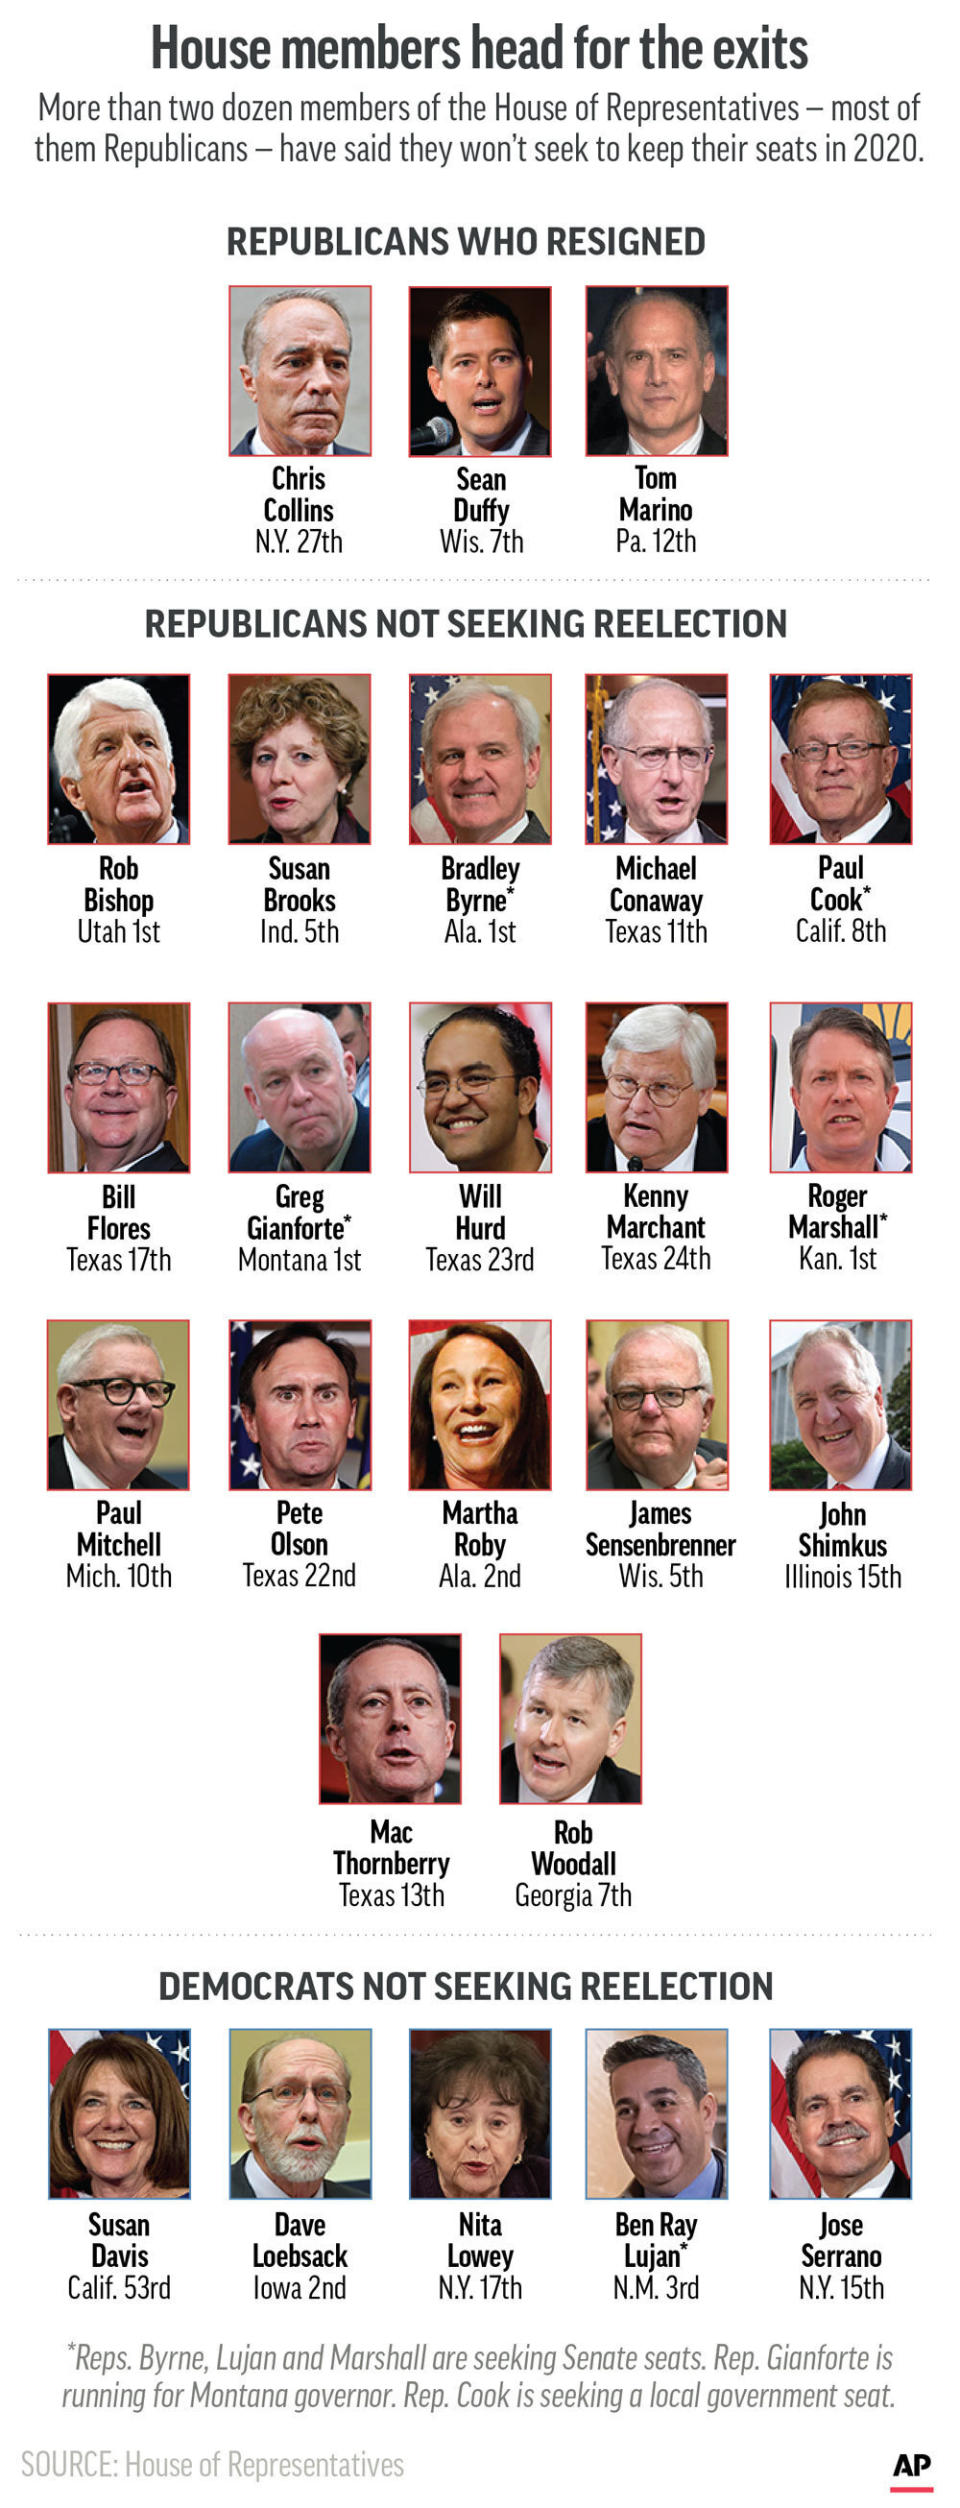 Members of the U.S. House of Representatives not seeking reelection in 2020.;